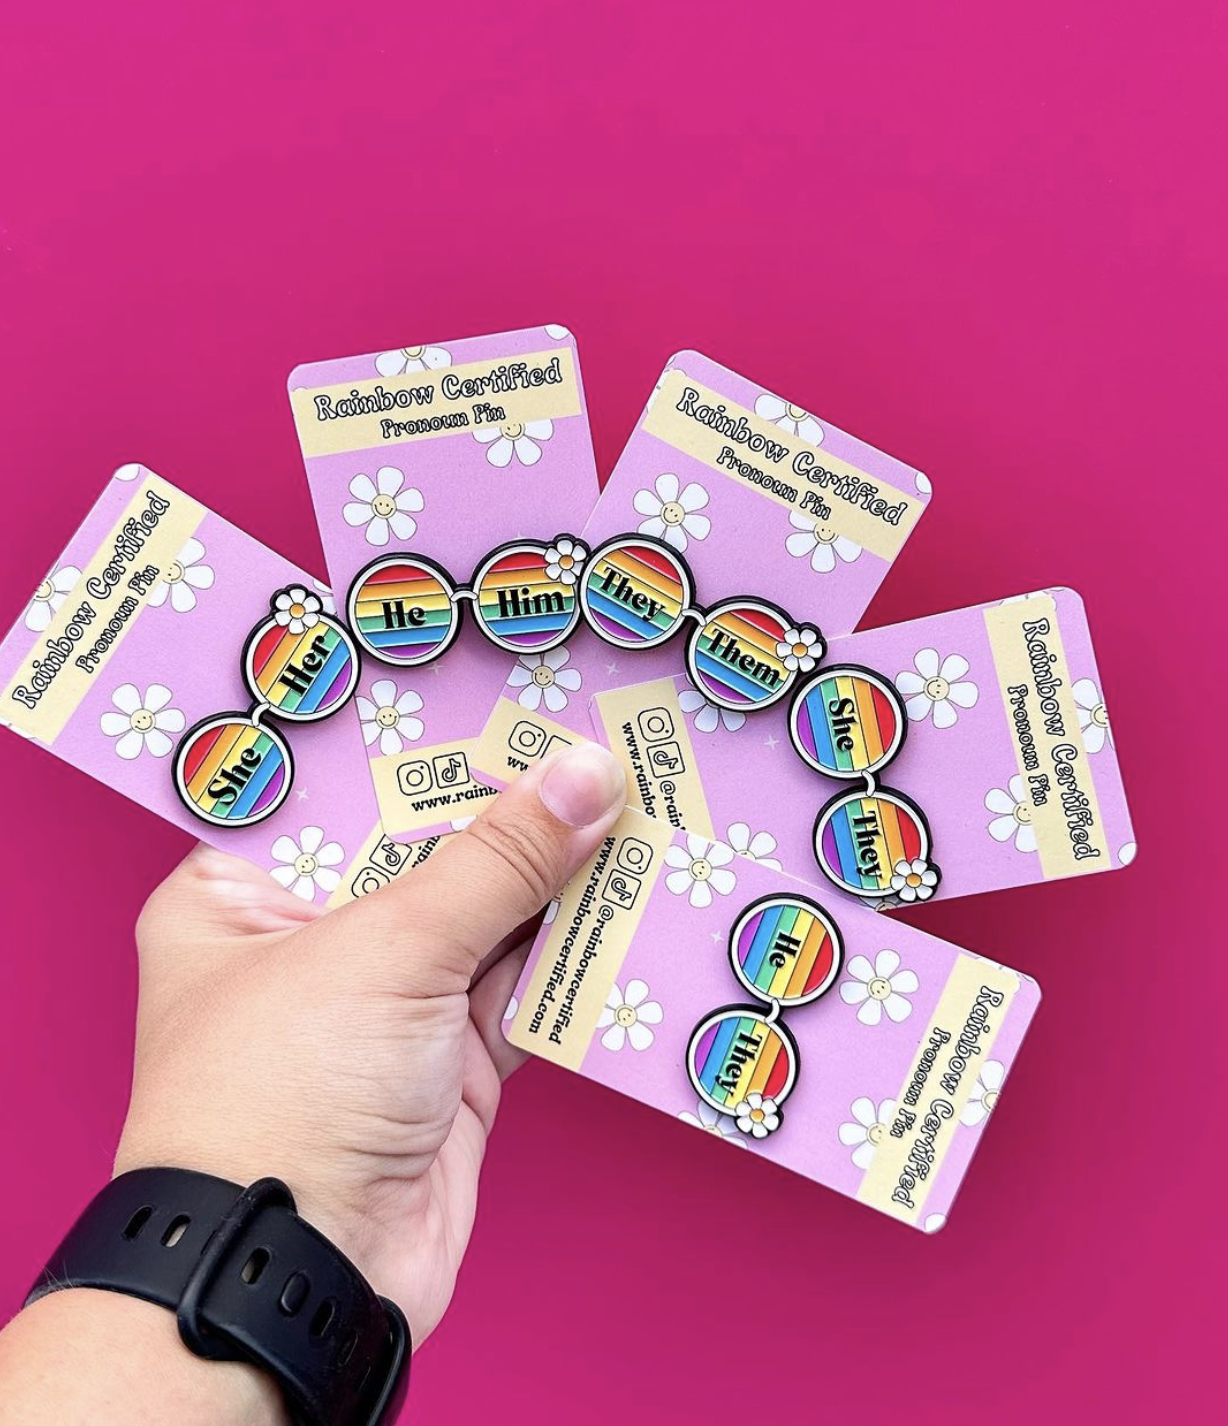 Hand holds out 4 packages of pins in a fan-like shape. Pins are circular and have different pronouns on them.